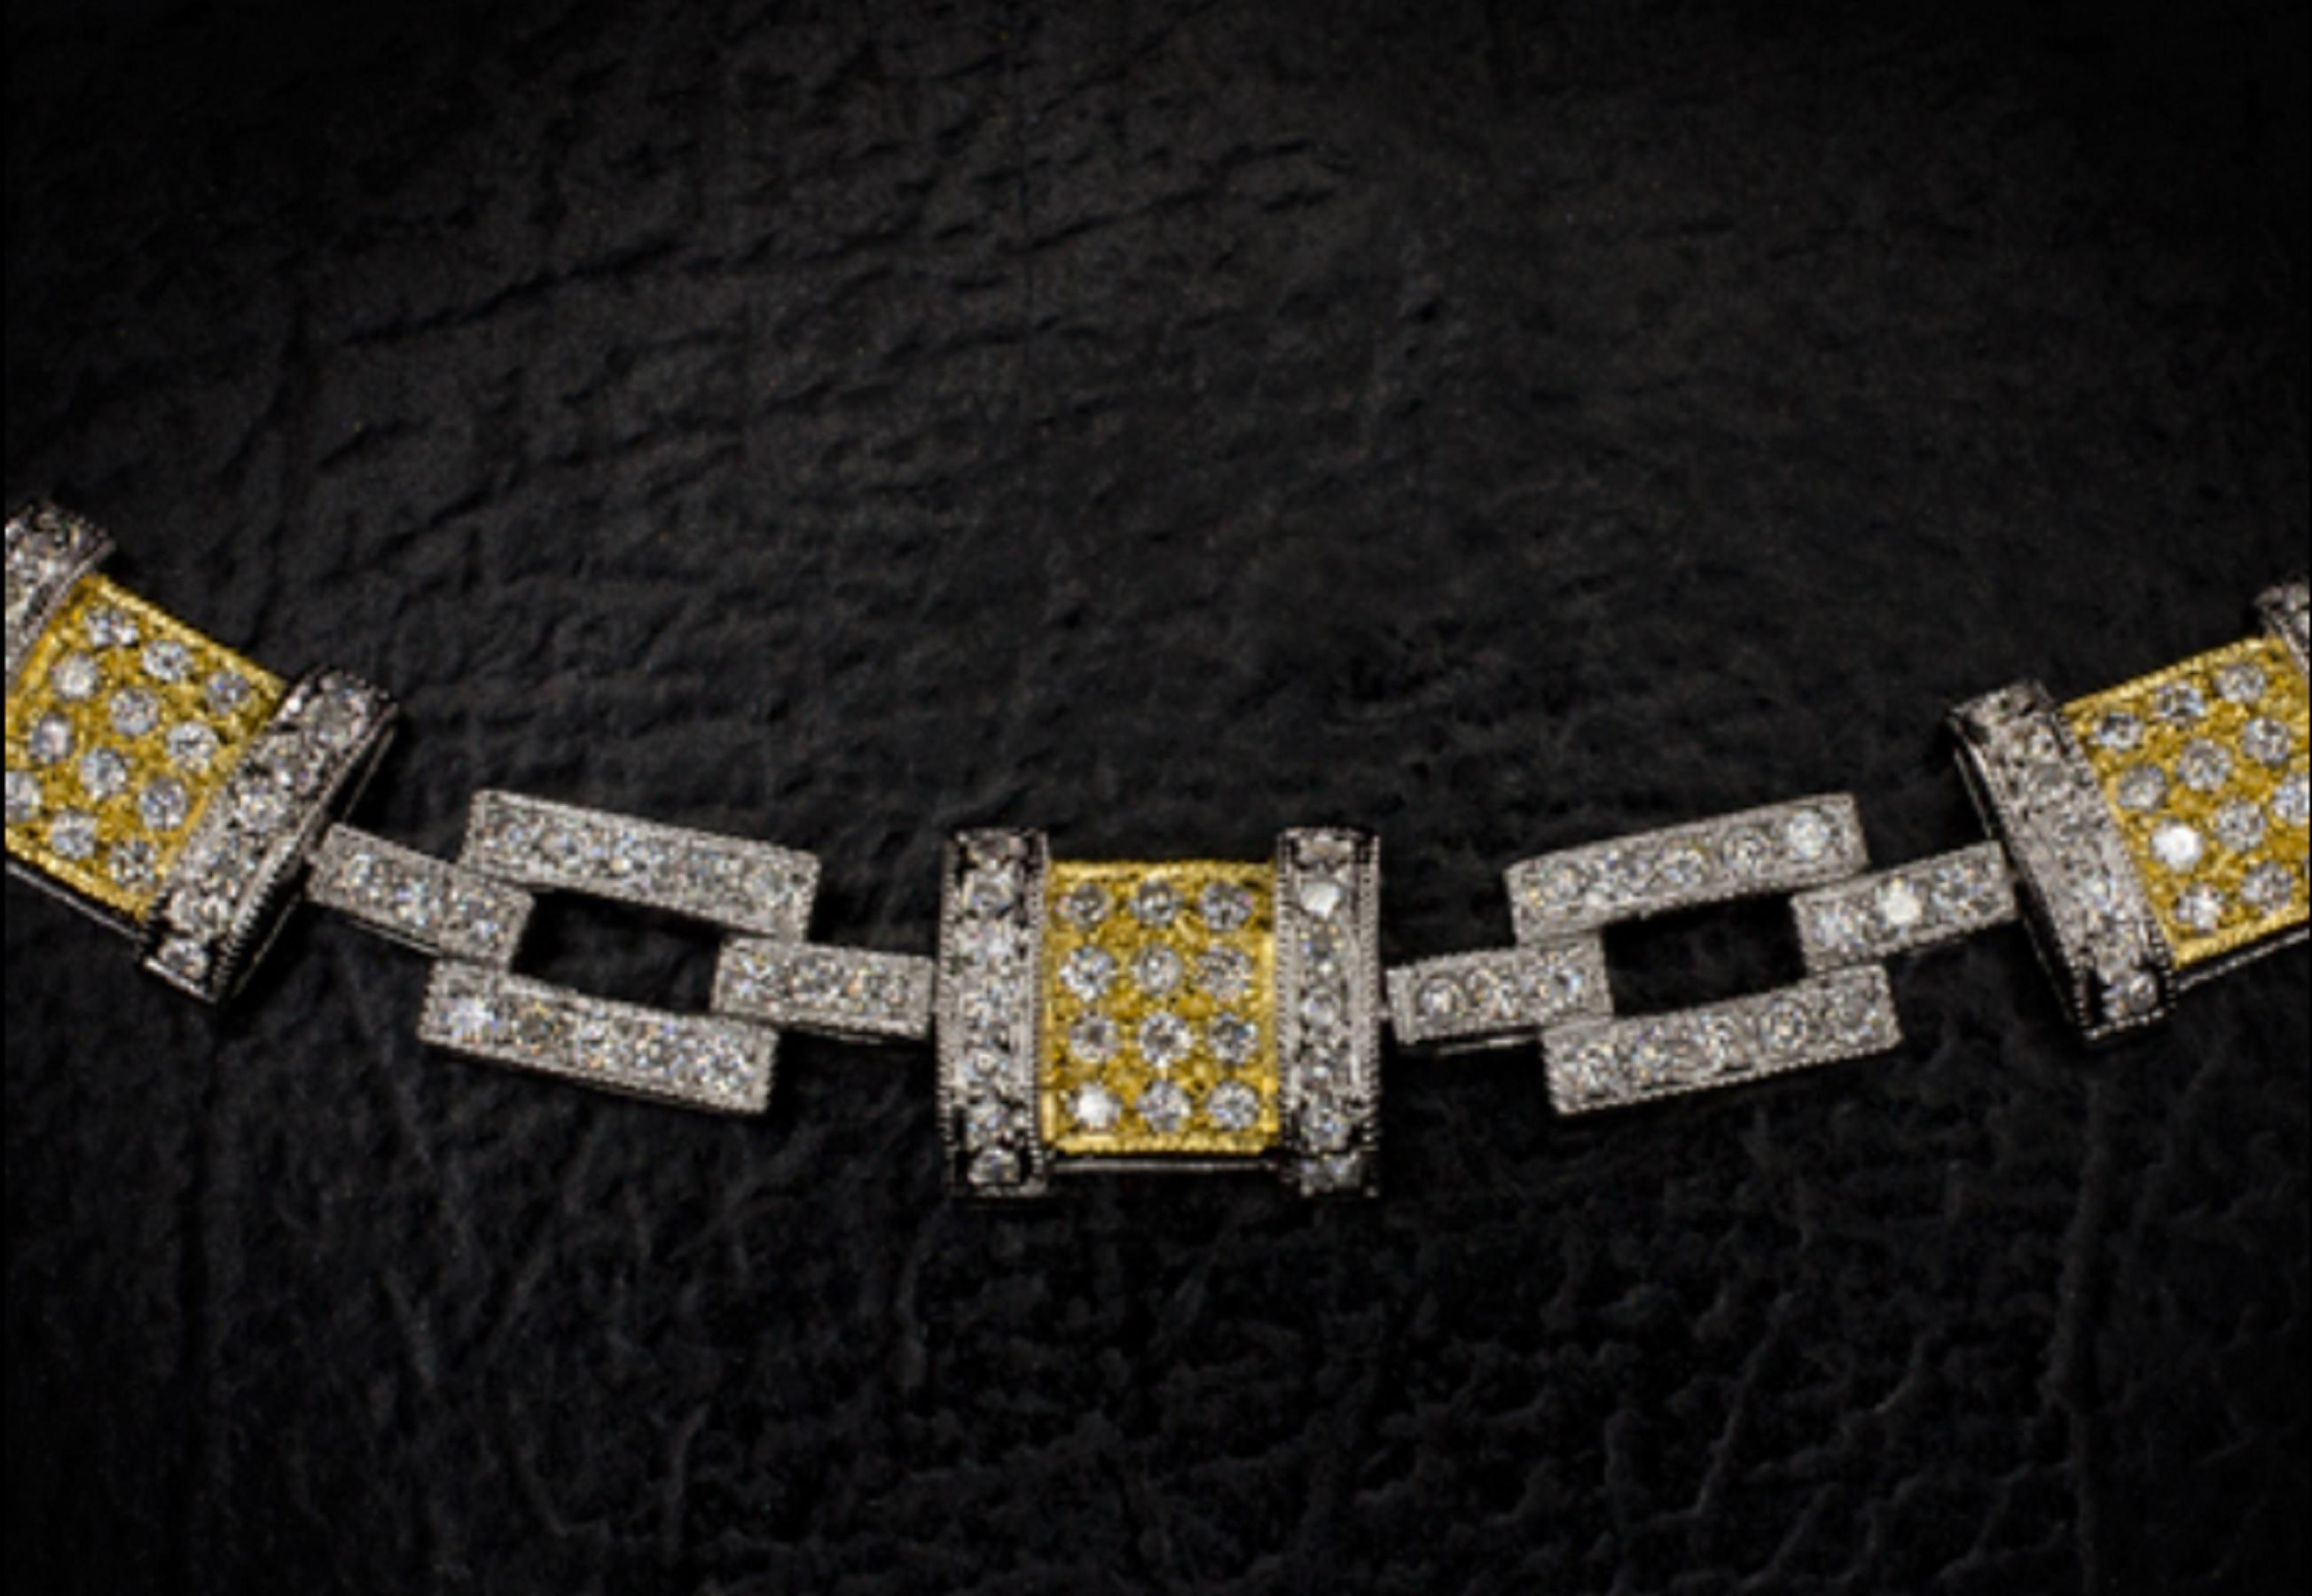 Exquisite tennis bracelet with two tones of gold and 2.50 carats of diamonds! The piece is full of gorgeous sparkle and it has a unique geometric design. 

Over 300 fully faceted round cut diamonds are perfectly set in this alluring bracelet and we